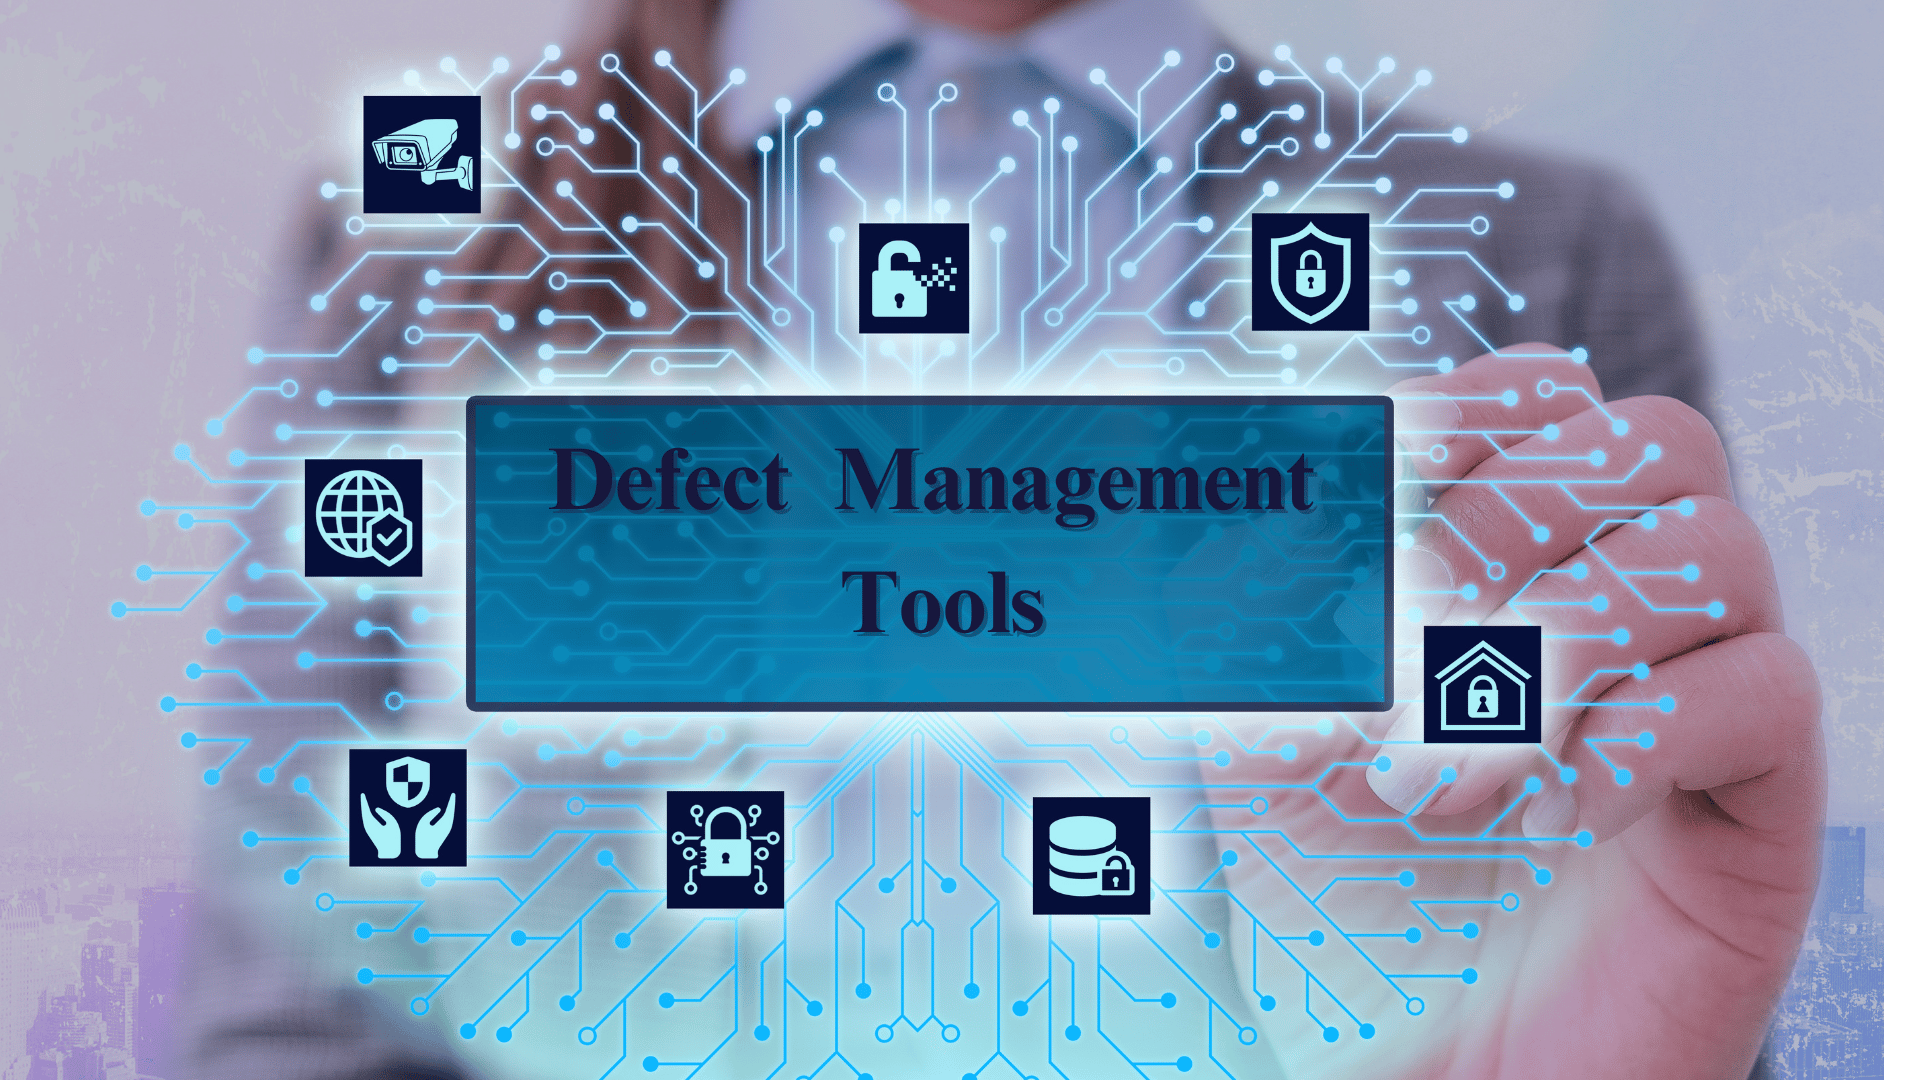 What are Defect Management Tools?